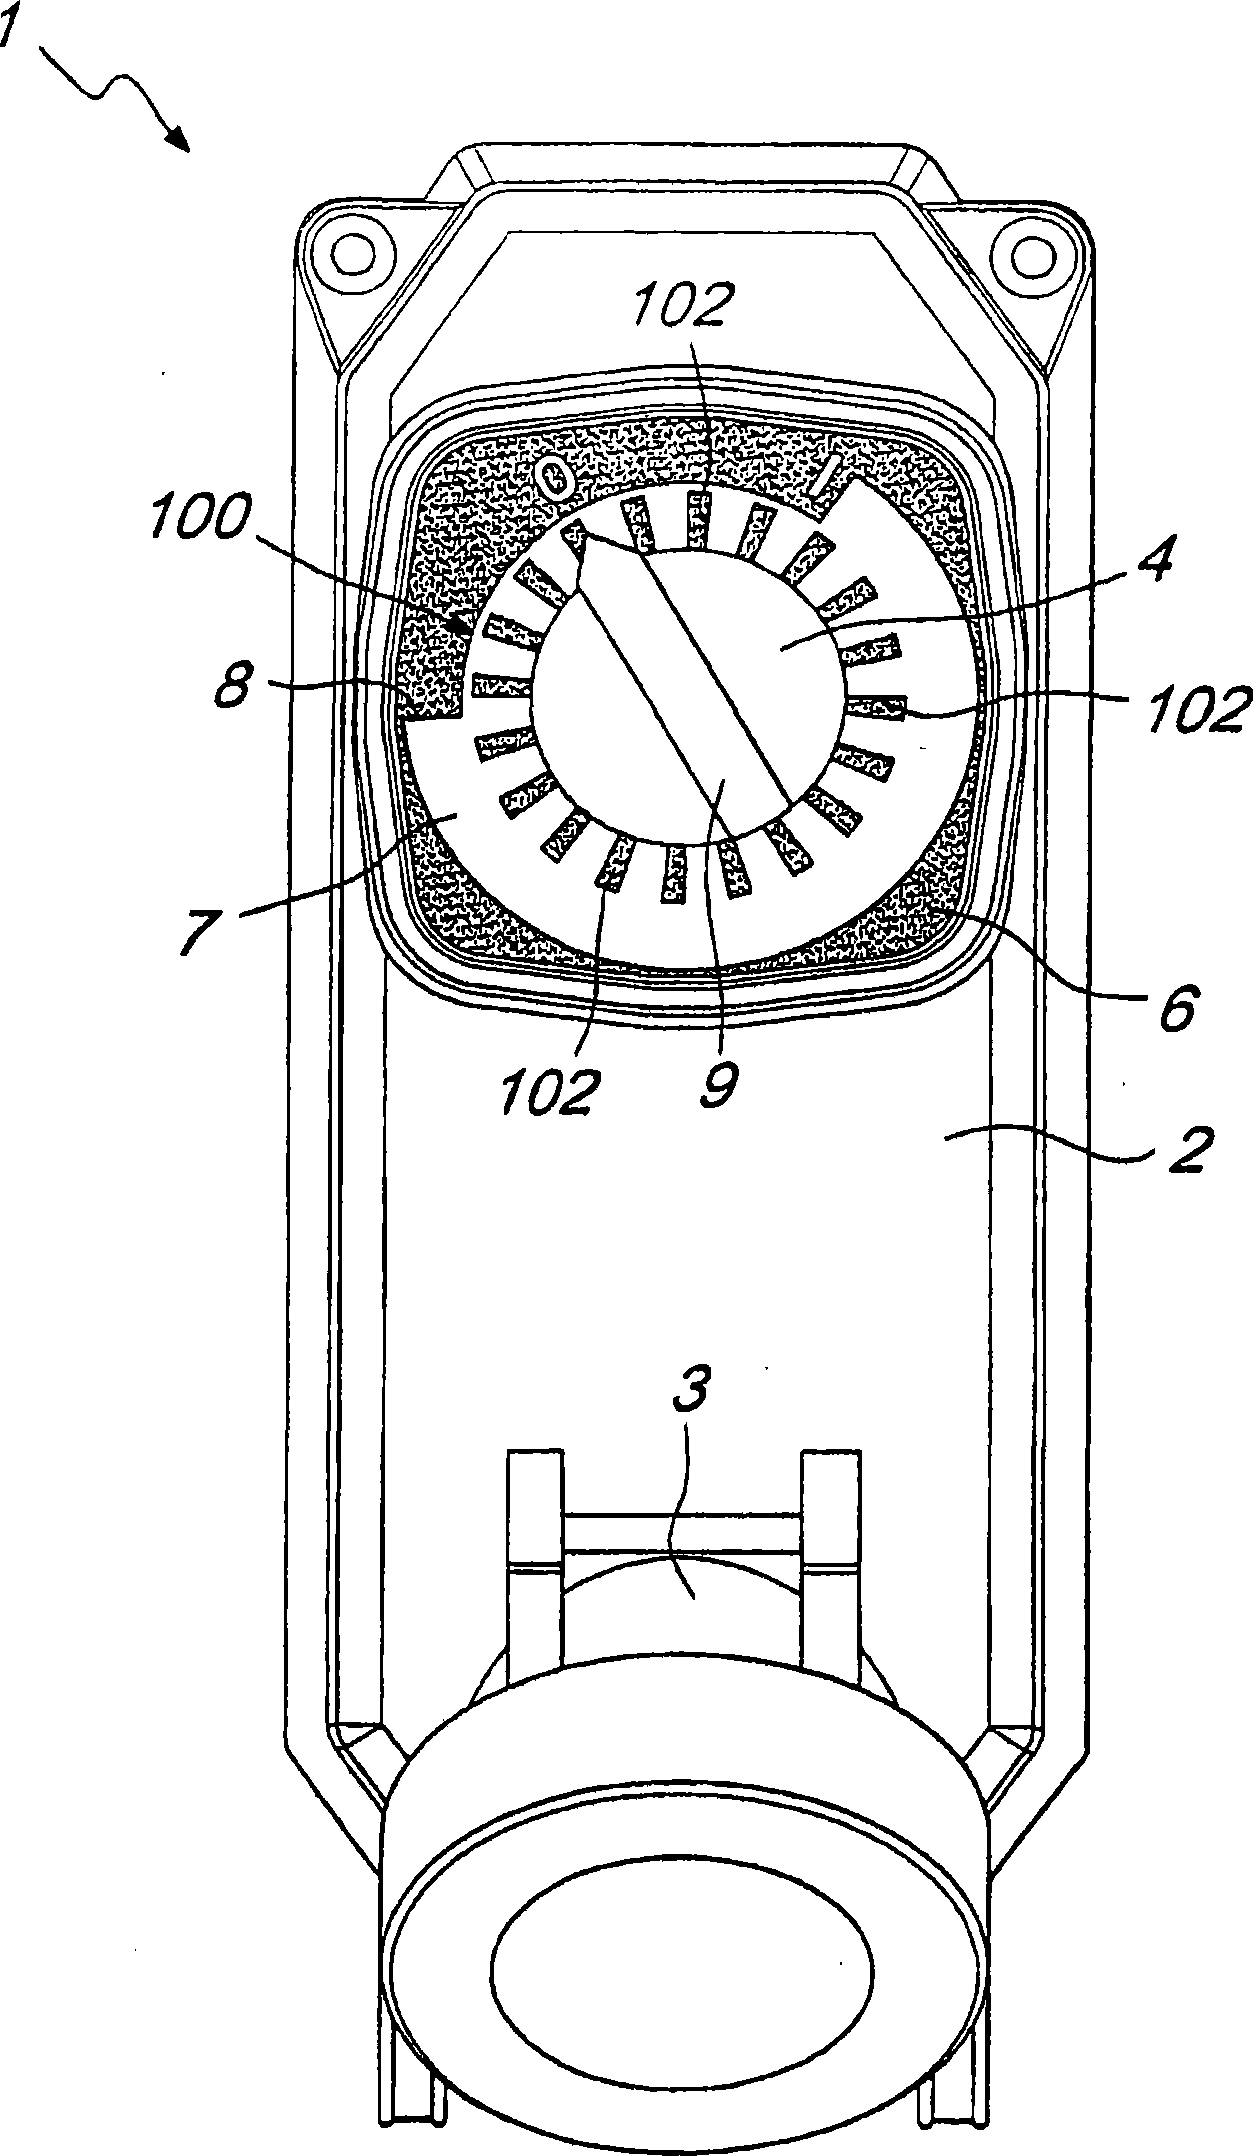 Control assembly for interlocked sockets